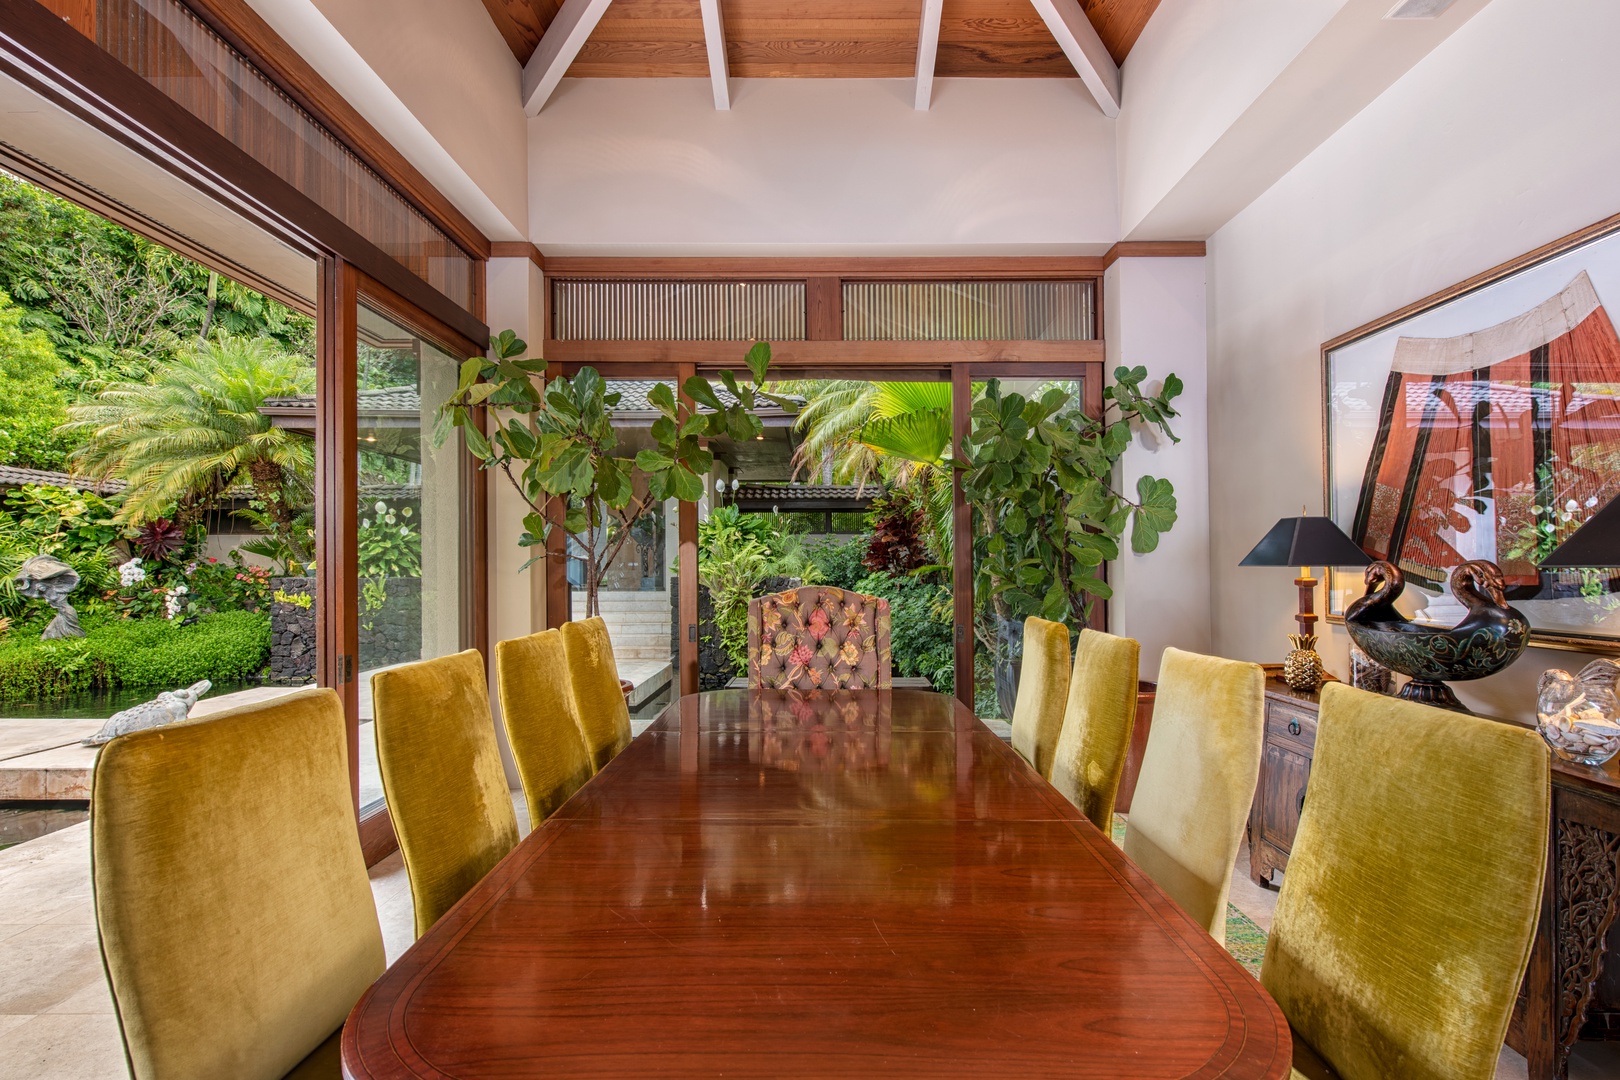 Kailua Kona Vacation Rentals, Hale Wailele** - Lofted dining area open to the great room and patios